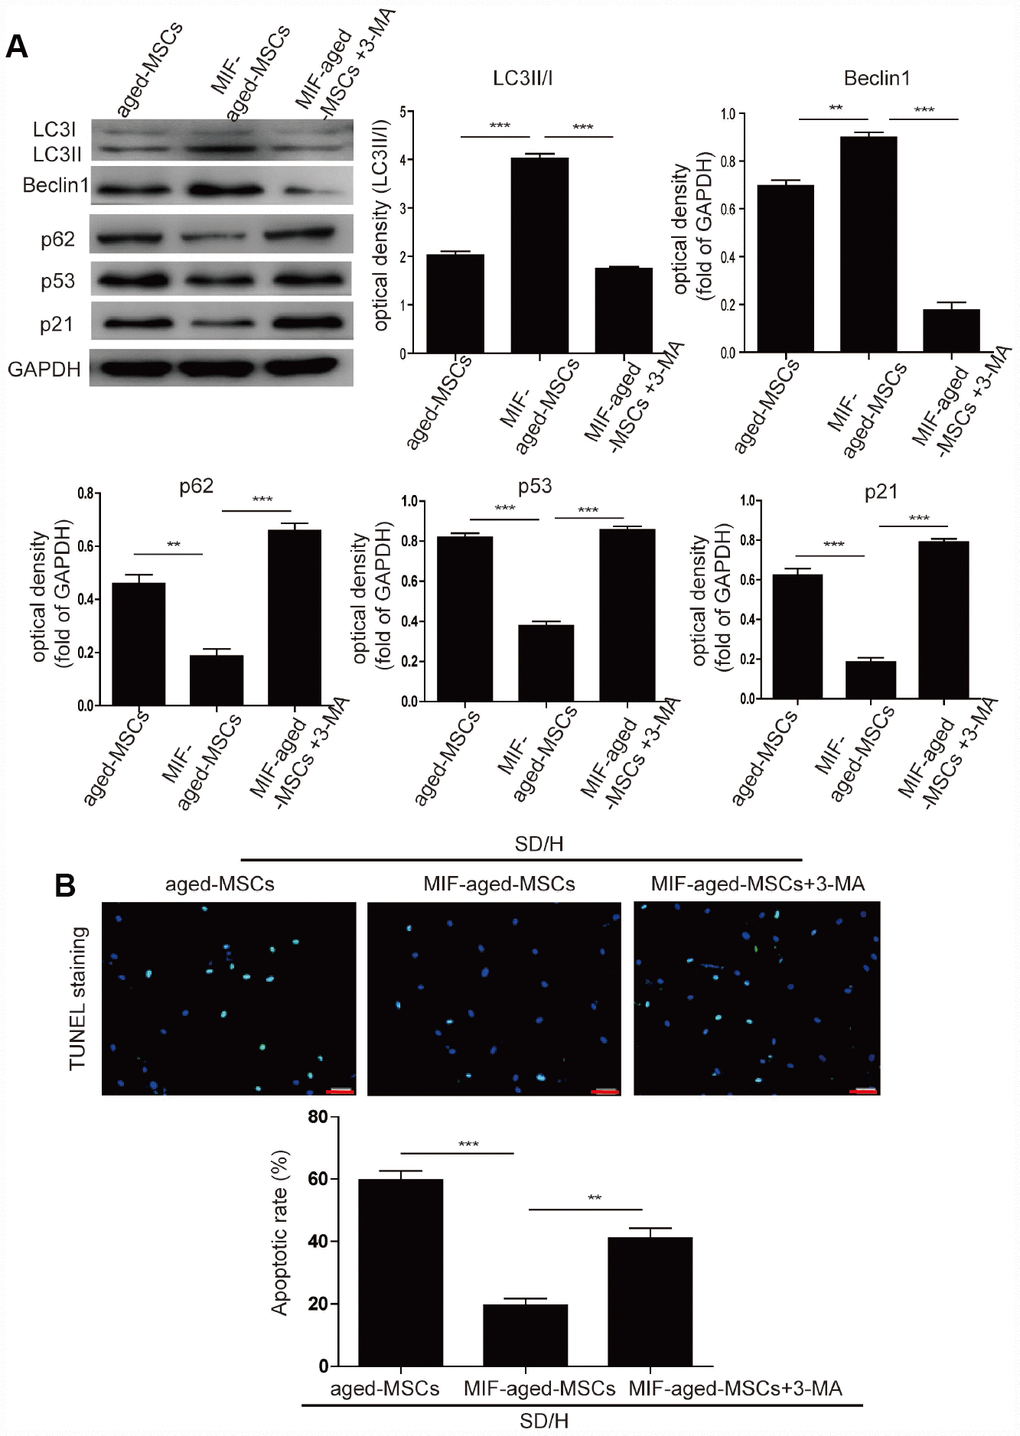 MIF rejuvenated aged MSCs by promoting autophagy. (A) Western blotting and quantitative analysis of LC3I/II, Beclin1, p62, p53 and p21 protein expression in aged MSCs and MIF-aged MSCs with or without 3-MA treatment. (B) Representative images of TUNEL staining and quantitative analysis of the apoptosis of aged MSCs and MIF-aged MSCs with or without 3-MA treatment under an SD/H challenge. Scale bar=100 μm. Data are expressed as the mean±SEM. n=3. **p